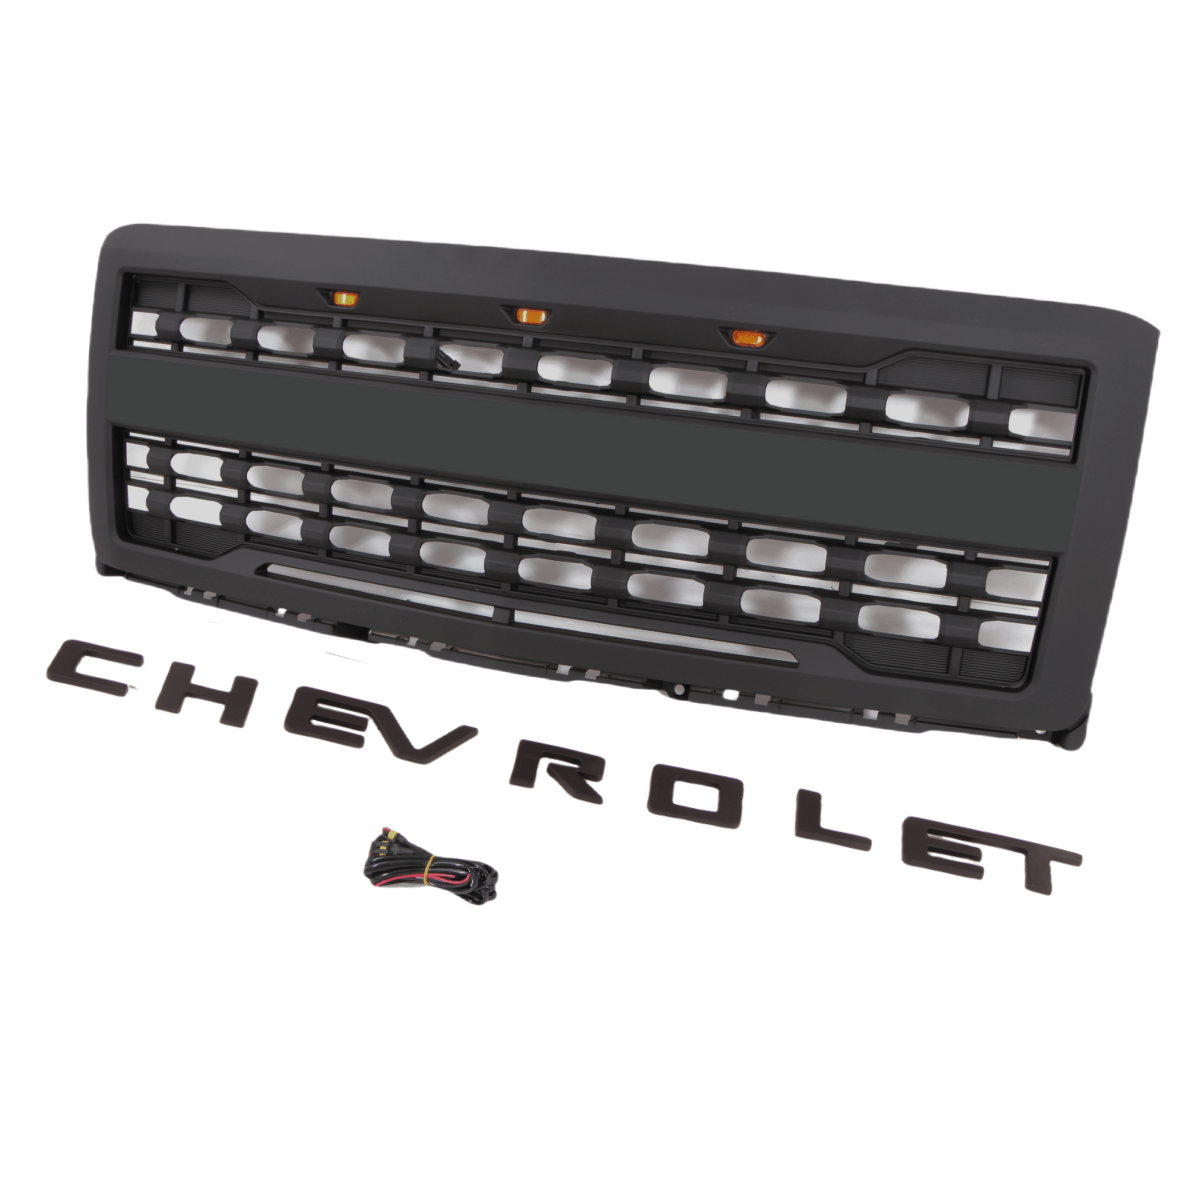 {WildWell}{ Chevrolet Grille}-{ Chevrolet Silverado Grille 2014-2015/9}-right